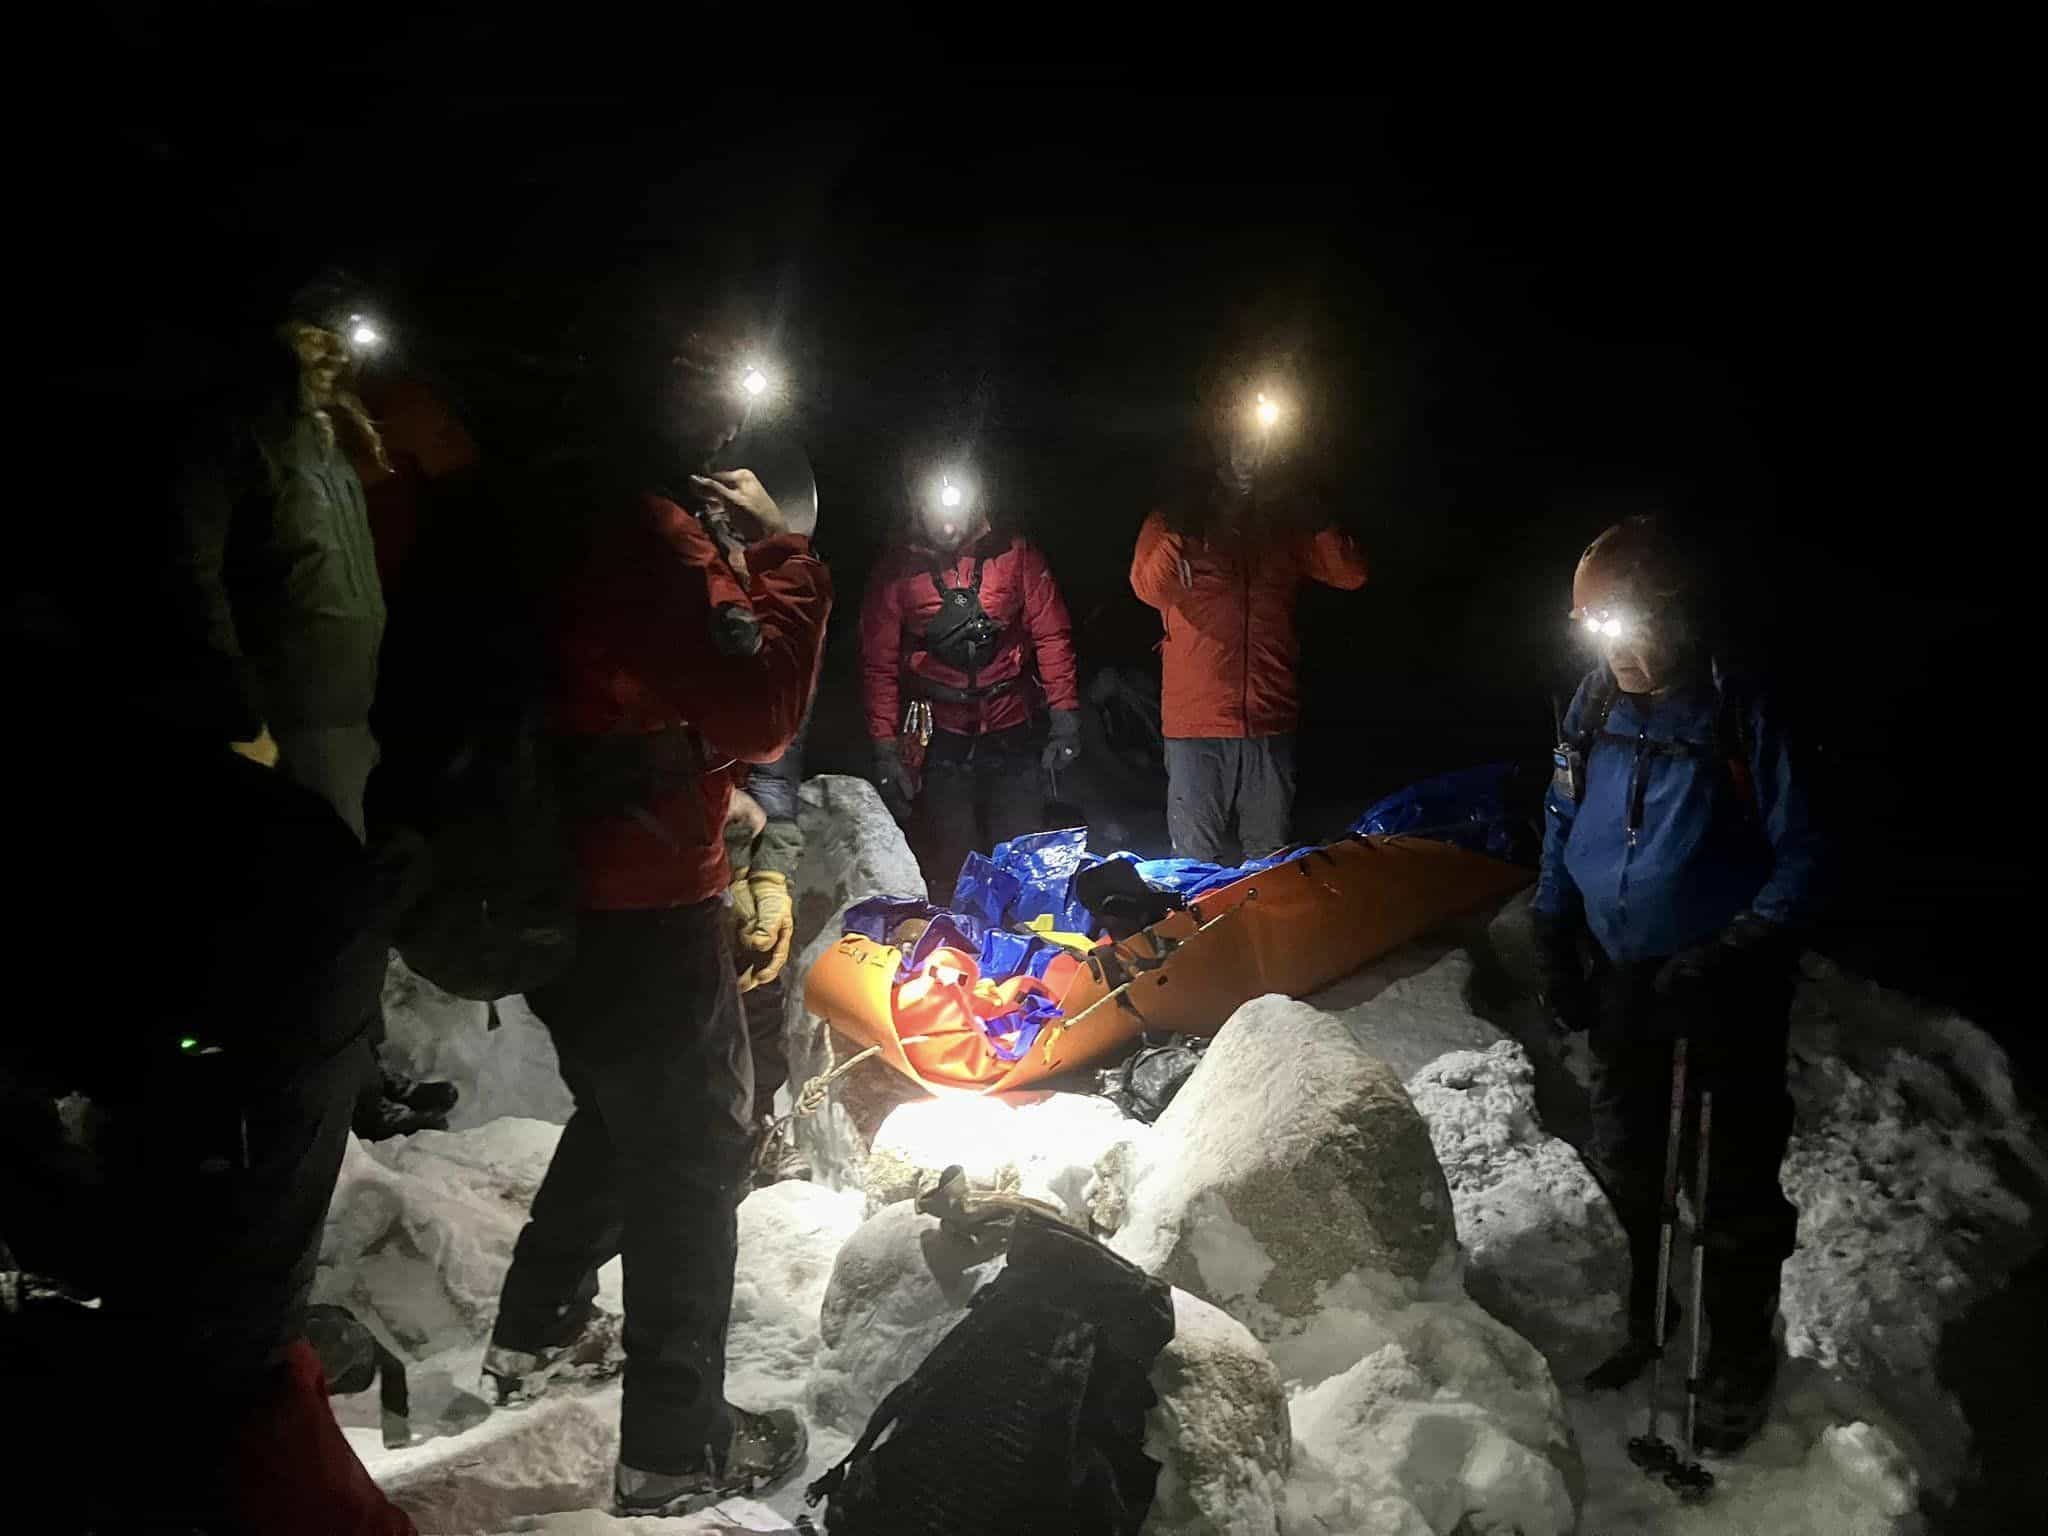 hiker rescued in snowstorm